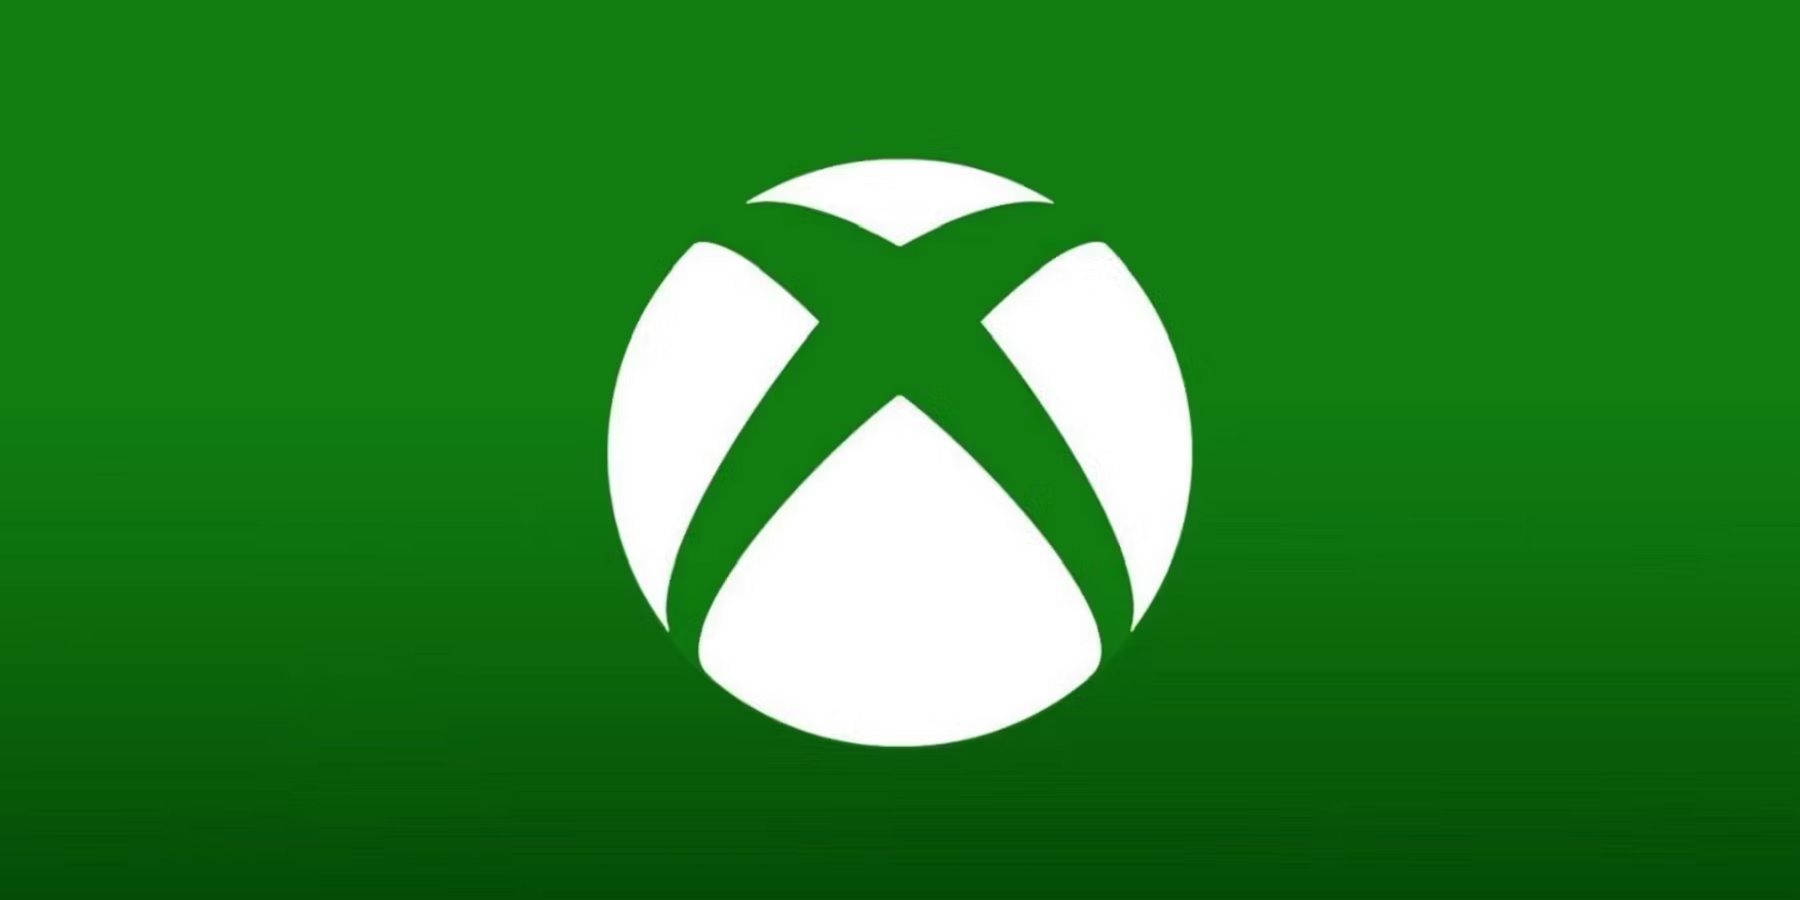 xbox logo with green background